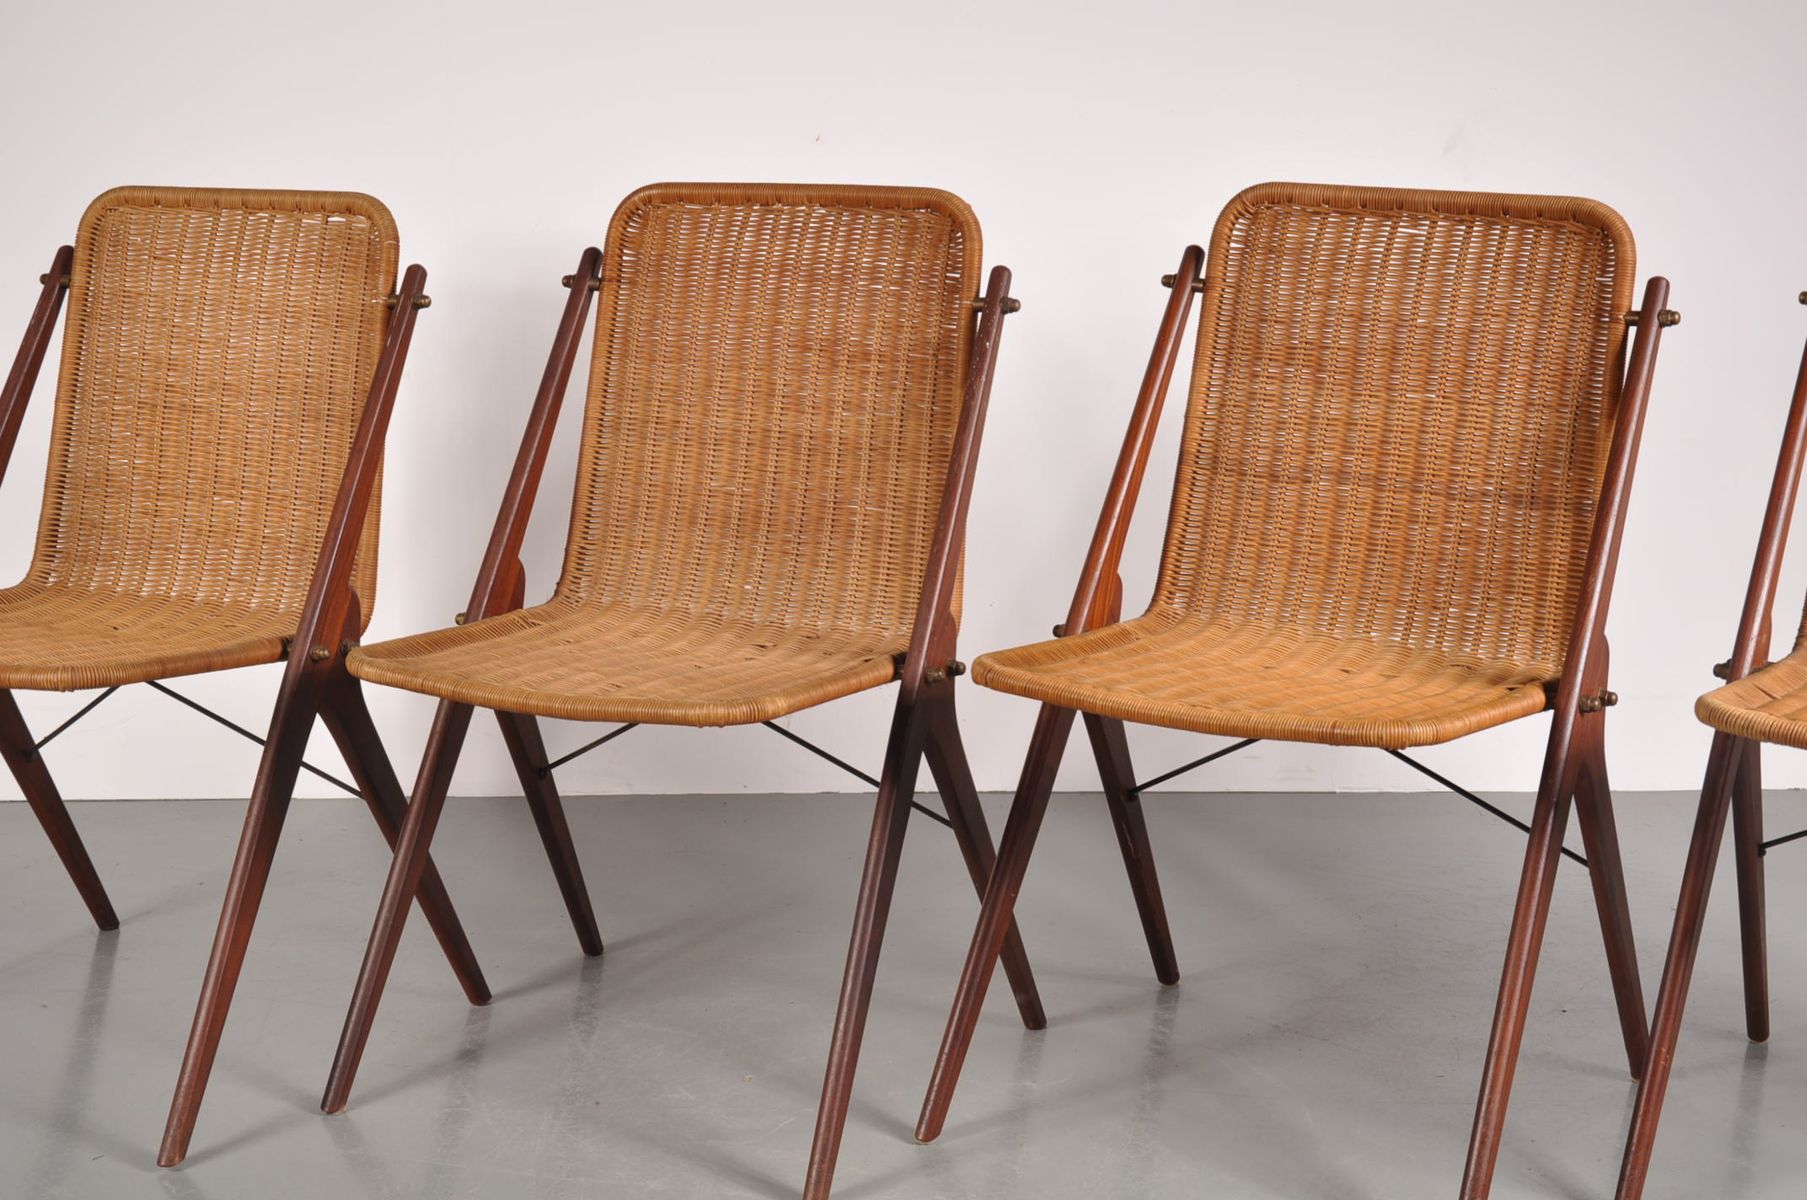 Vintage Teak and Wicker Dining Chairs, Set of 4 for sale at Pamono